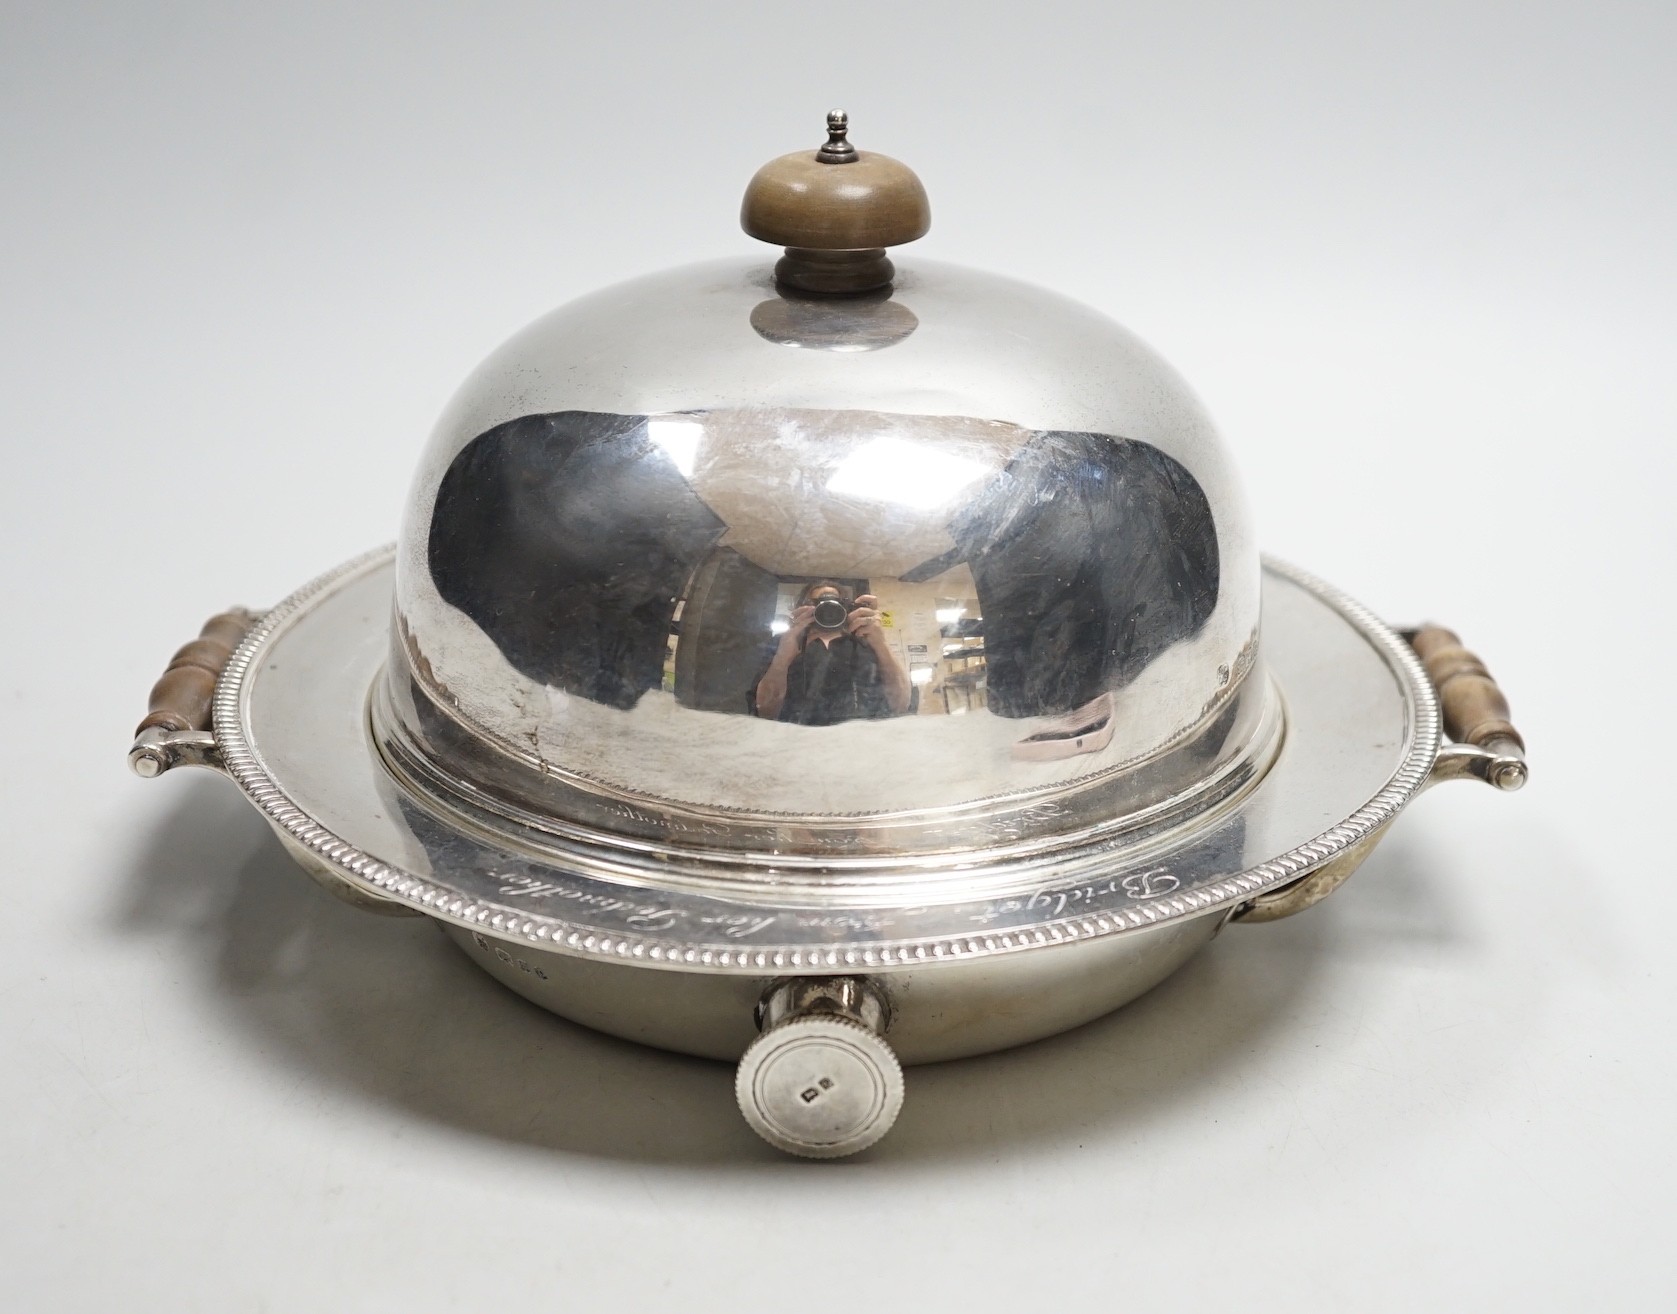 A George V silver circular two handled warming dish and cloche, by J. Parkes & Co, London, 1930, with engraved inscription, width 20.8cm, gross weight 34.4oz.                                                              